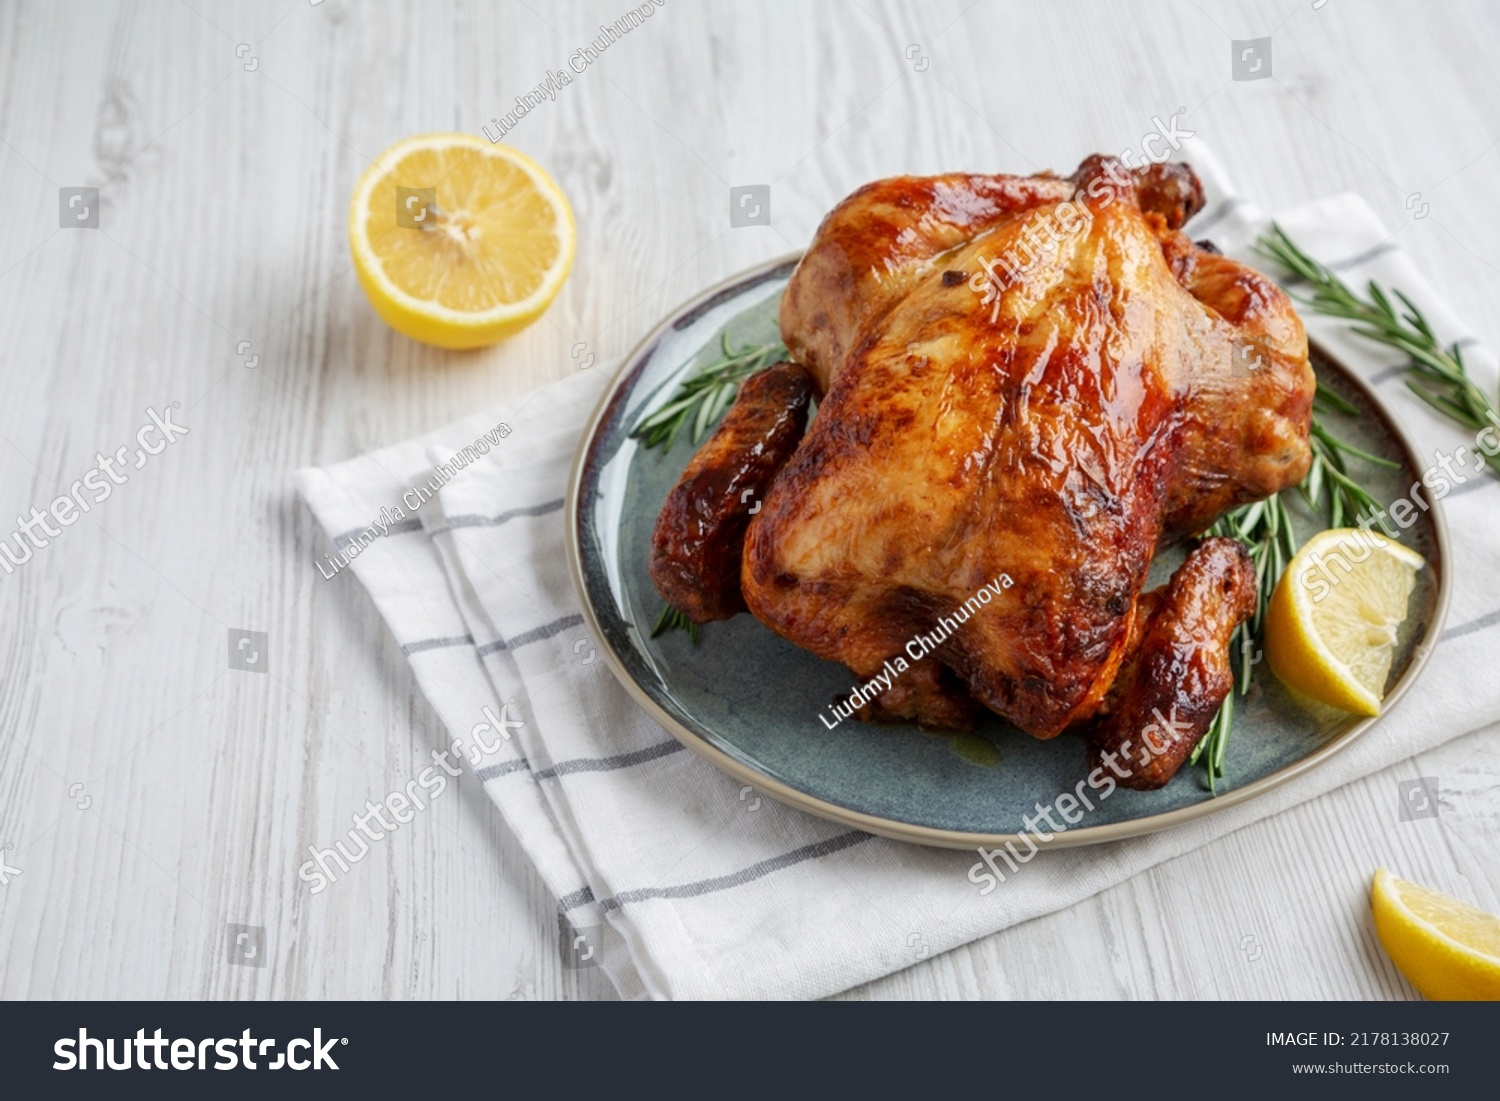 Homemade Lemon and Herb Rotisserie Chicken on a Plate, low angle view. Copy space. #2178138027